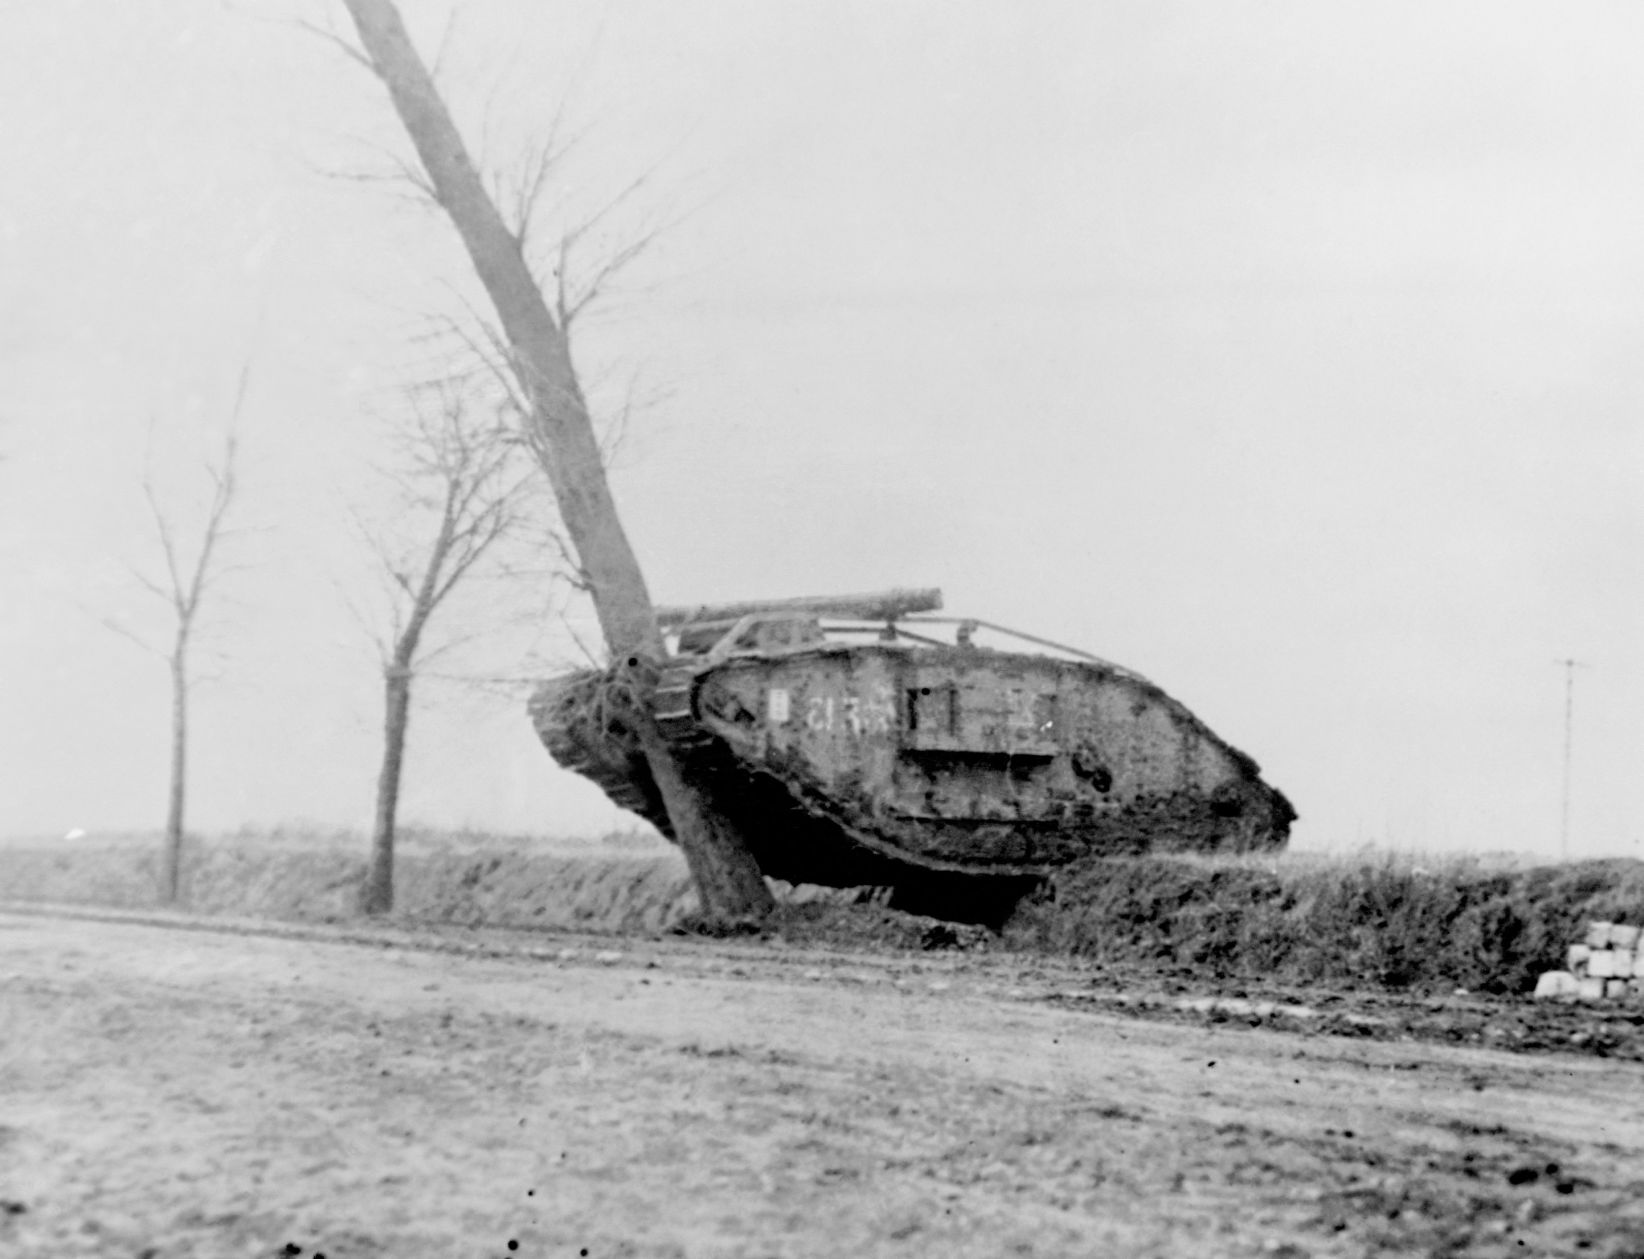 tanks in large number were first used by the british at the battle of